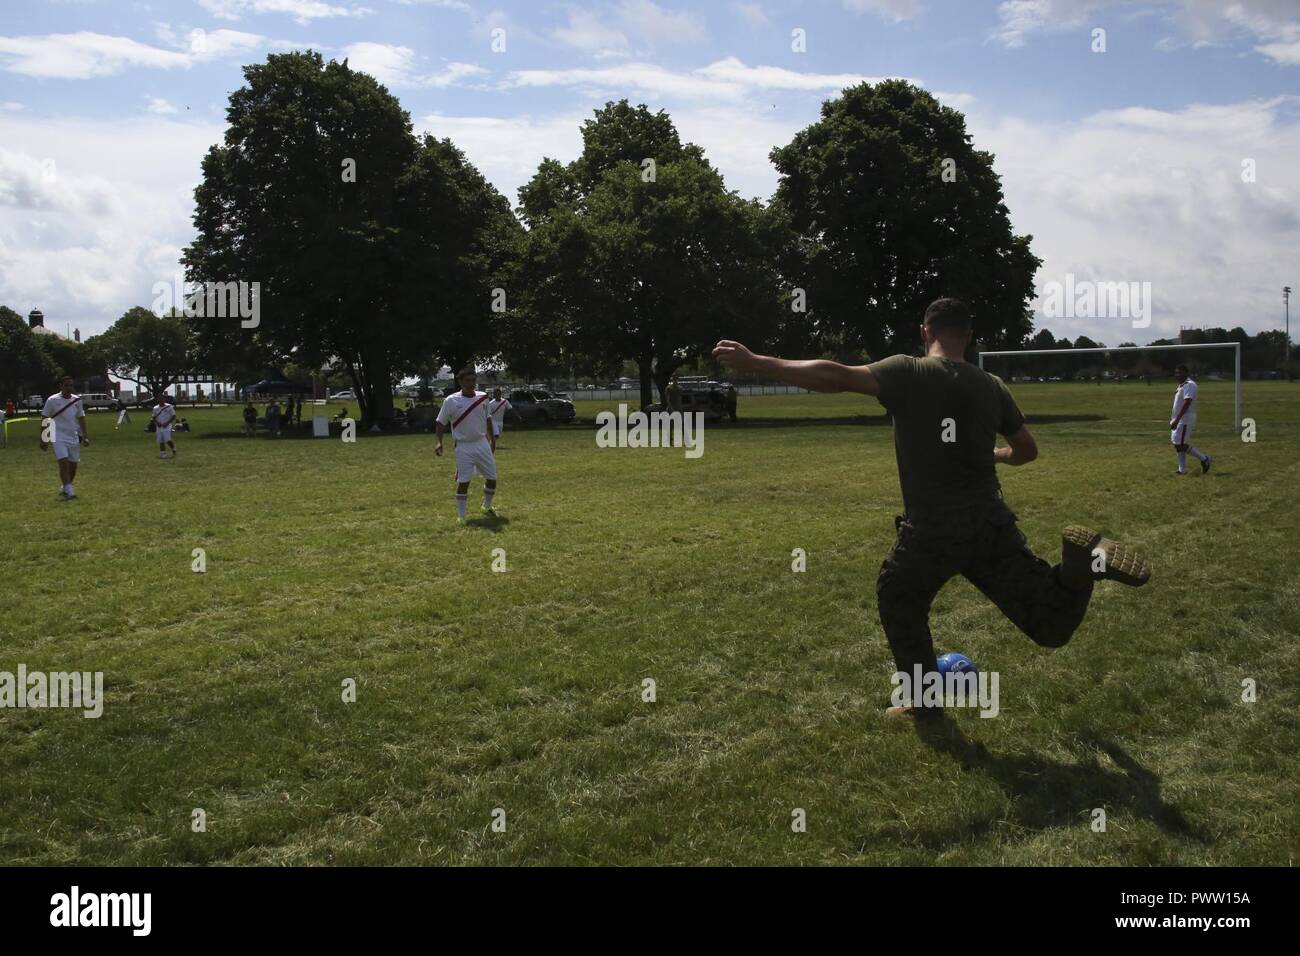 Lance Cpl. Scott Harder winds up to kick the ball to his teammates during the Sail Boston 2017 Soccer Tournament held at Joe Moakley Park in Boston, Mass., June 20, 2017. The tournament was a friendly competition aimed at establishing rapport among service members from around the world and others participating in Sail Boston. Marines and Sailors from countries including Chile, Peru, and Ecuador attended the tournament. Harder is a motor transport specialist assigned to Combat Logistics Battalion 8, Combat Logistics Regiment 2, 2nd Marine Logistics Battalion. Stock Photo